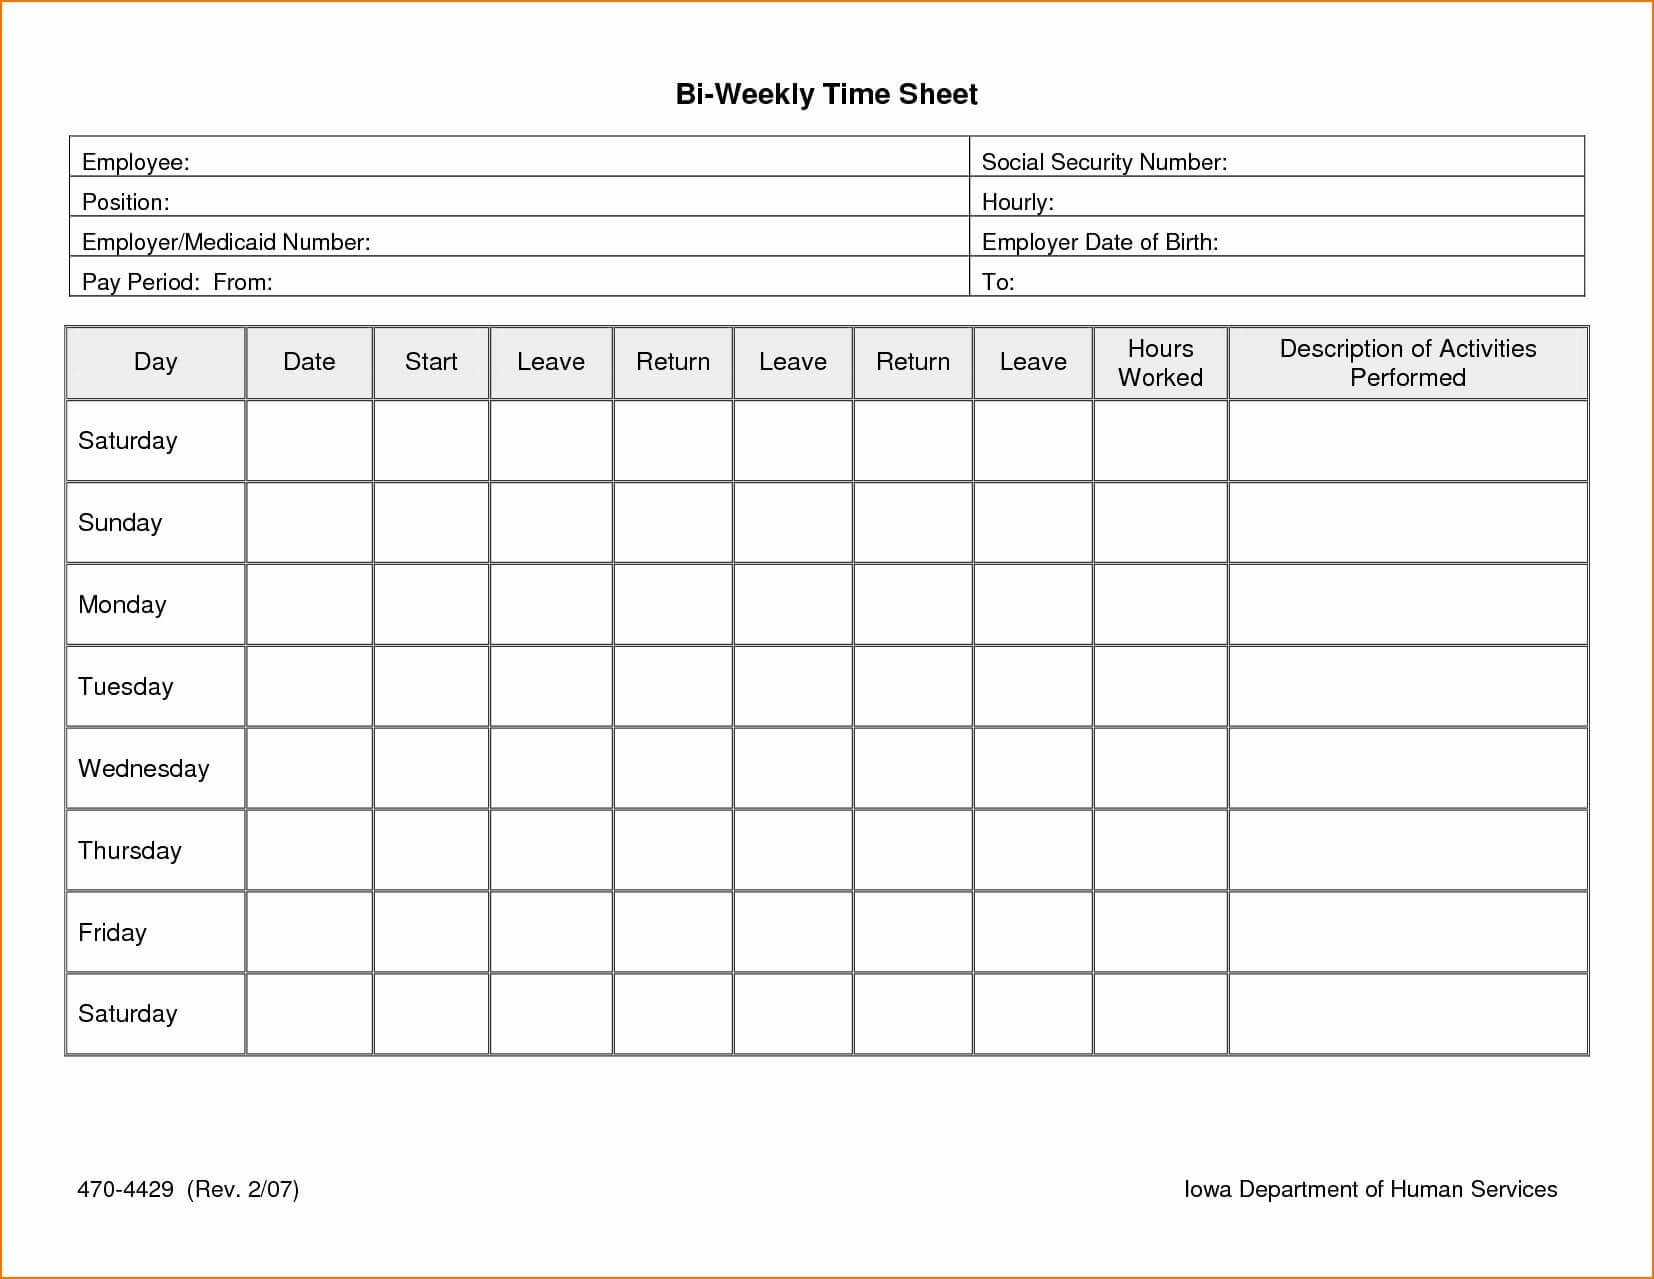 009 Time Card Template Free Excel 1654X1279 Incredible Ideas Pertaining To Weekly Time Card Template Free